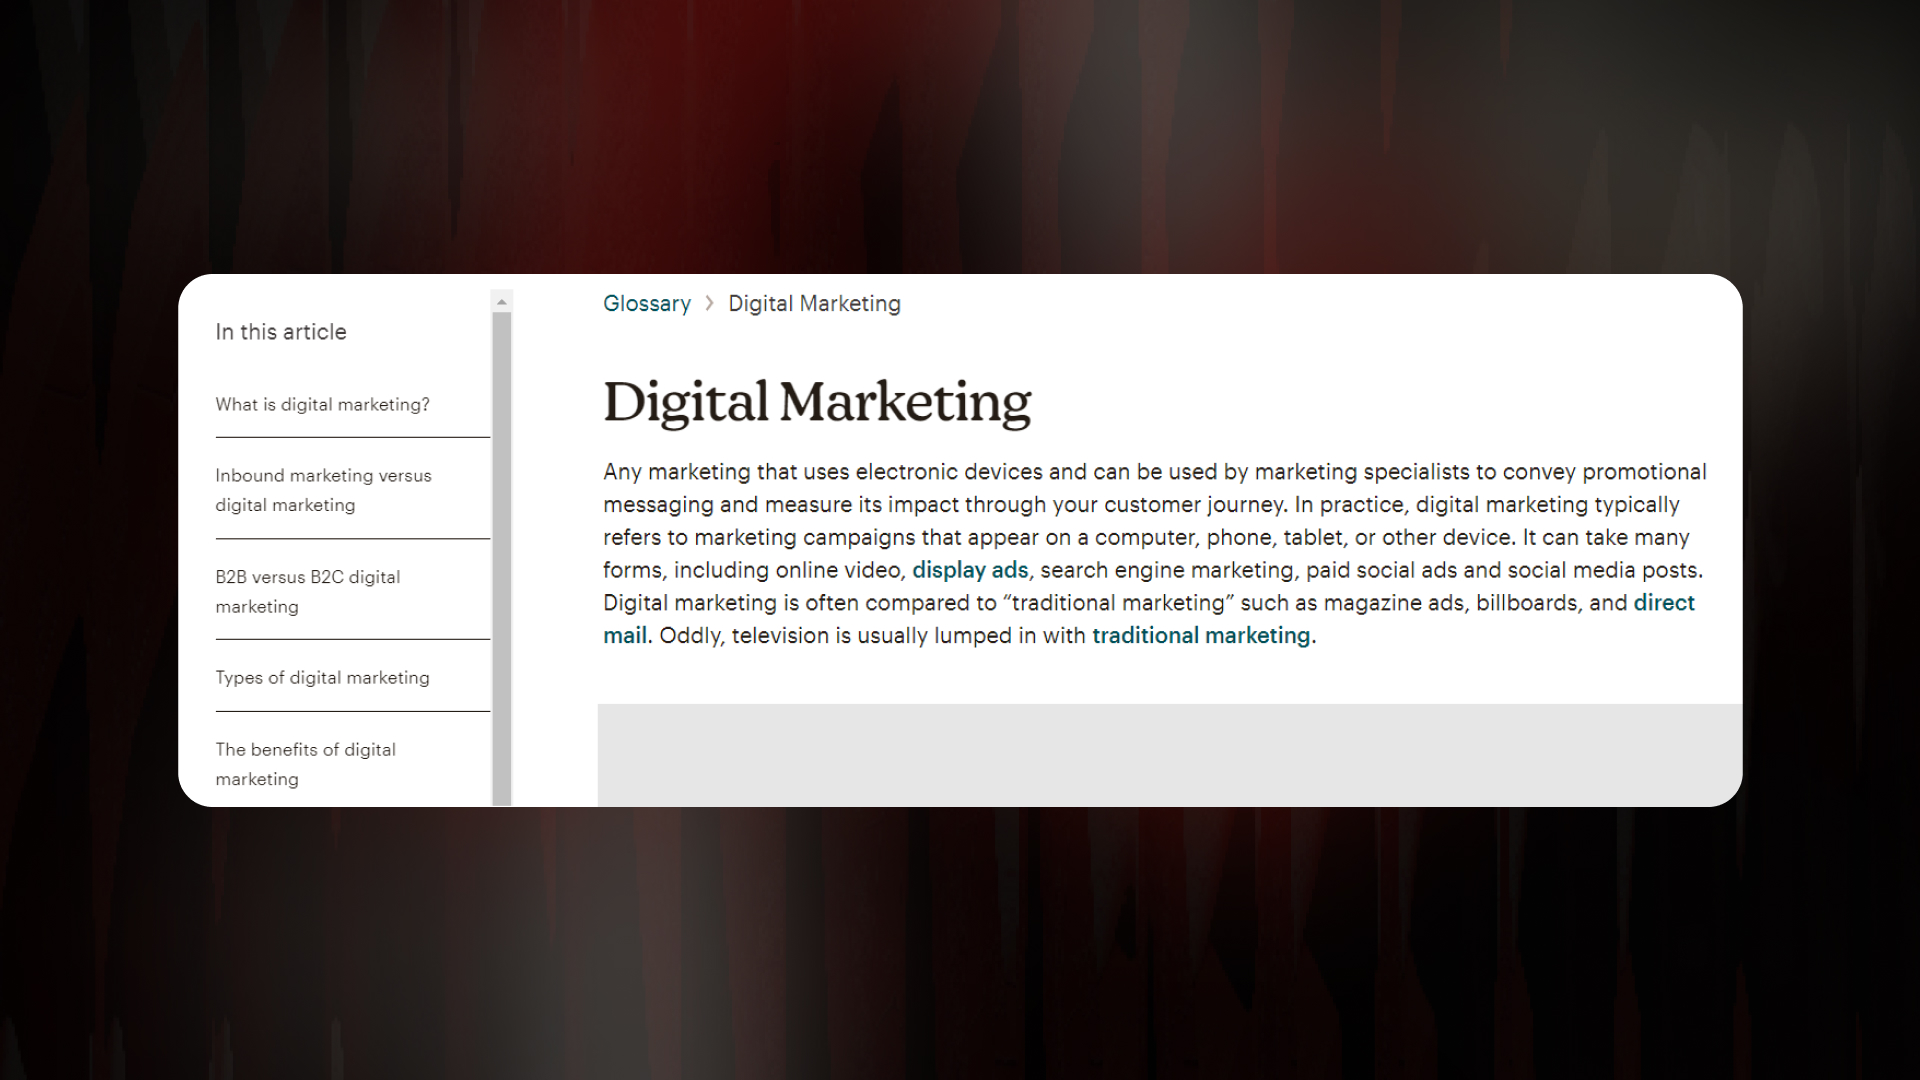 Table of contents in the article about digital marketing